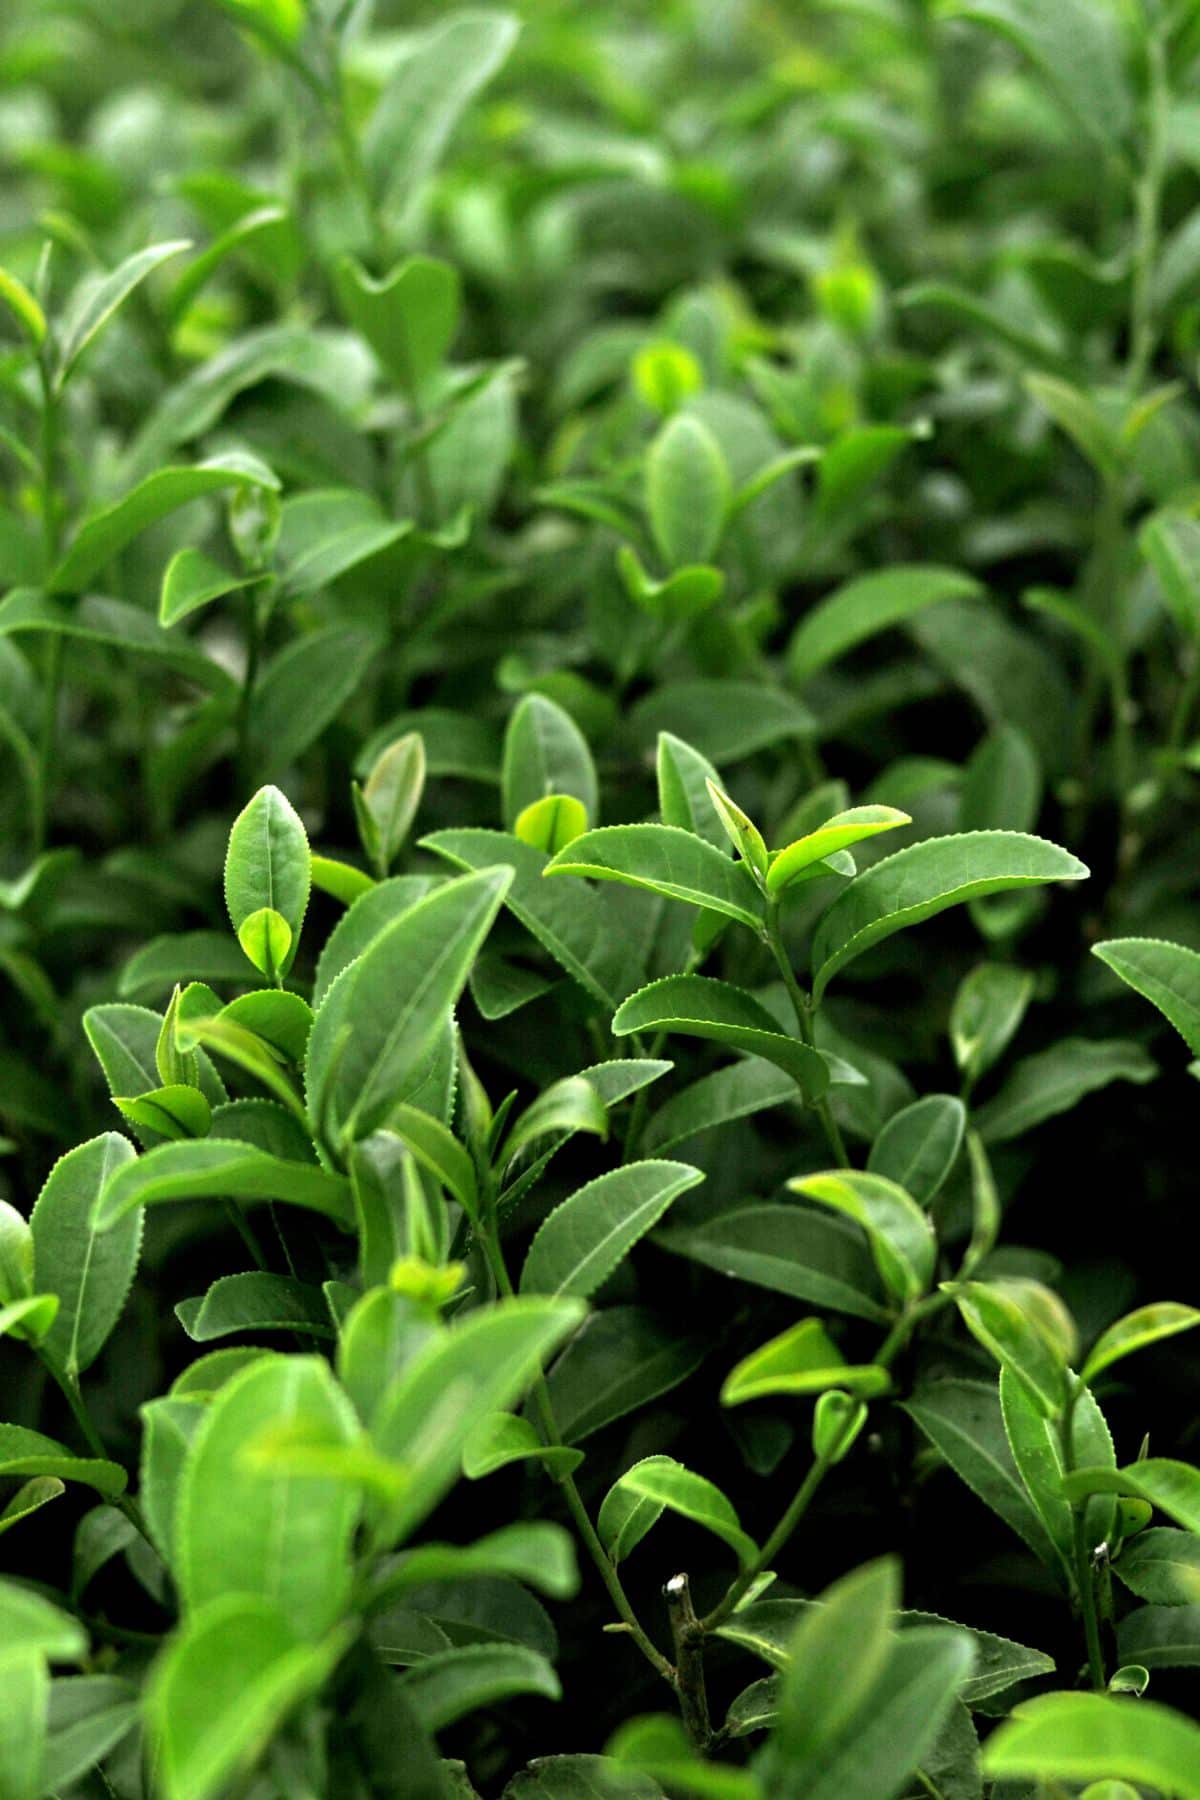 green tea leaves that produce green tea leaf extract.